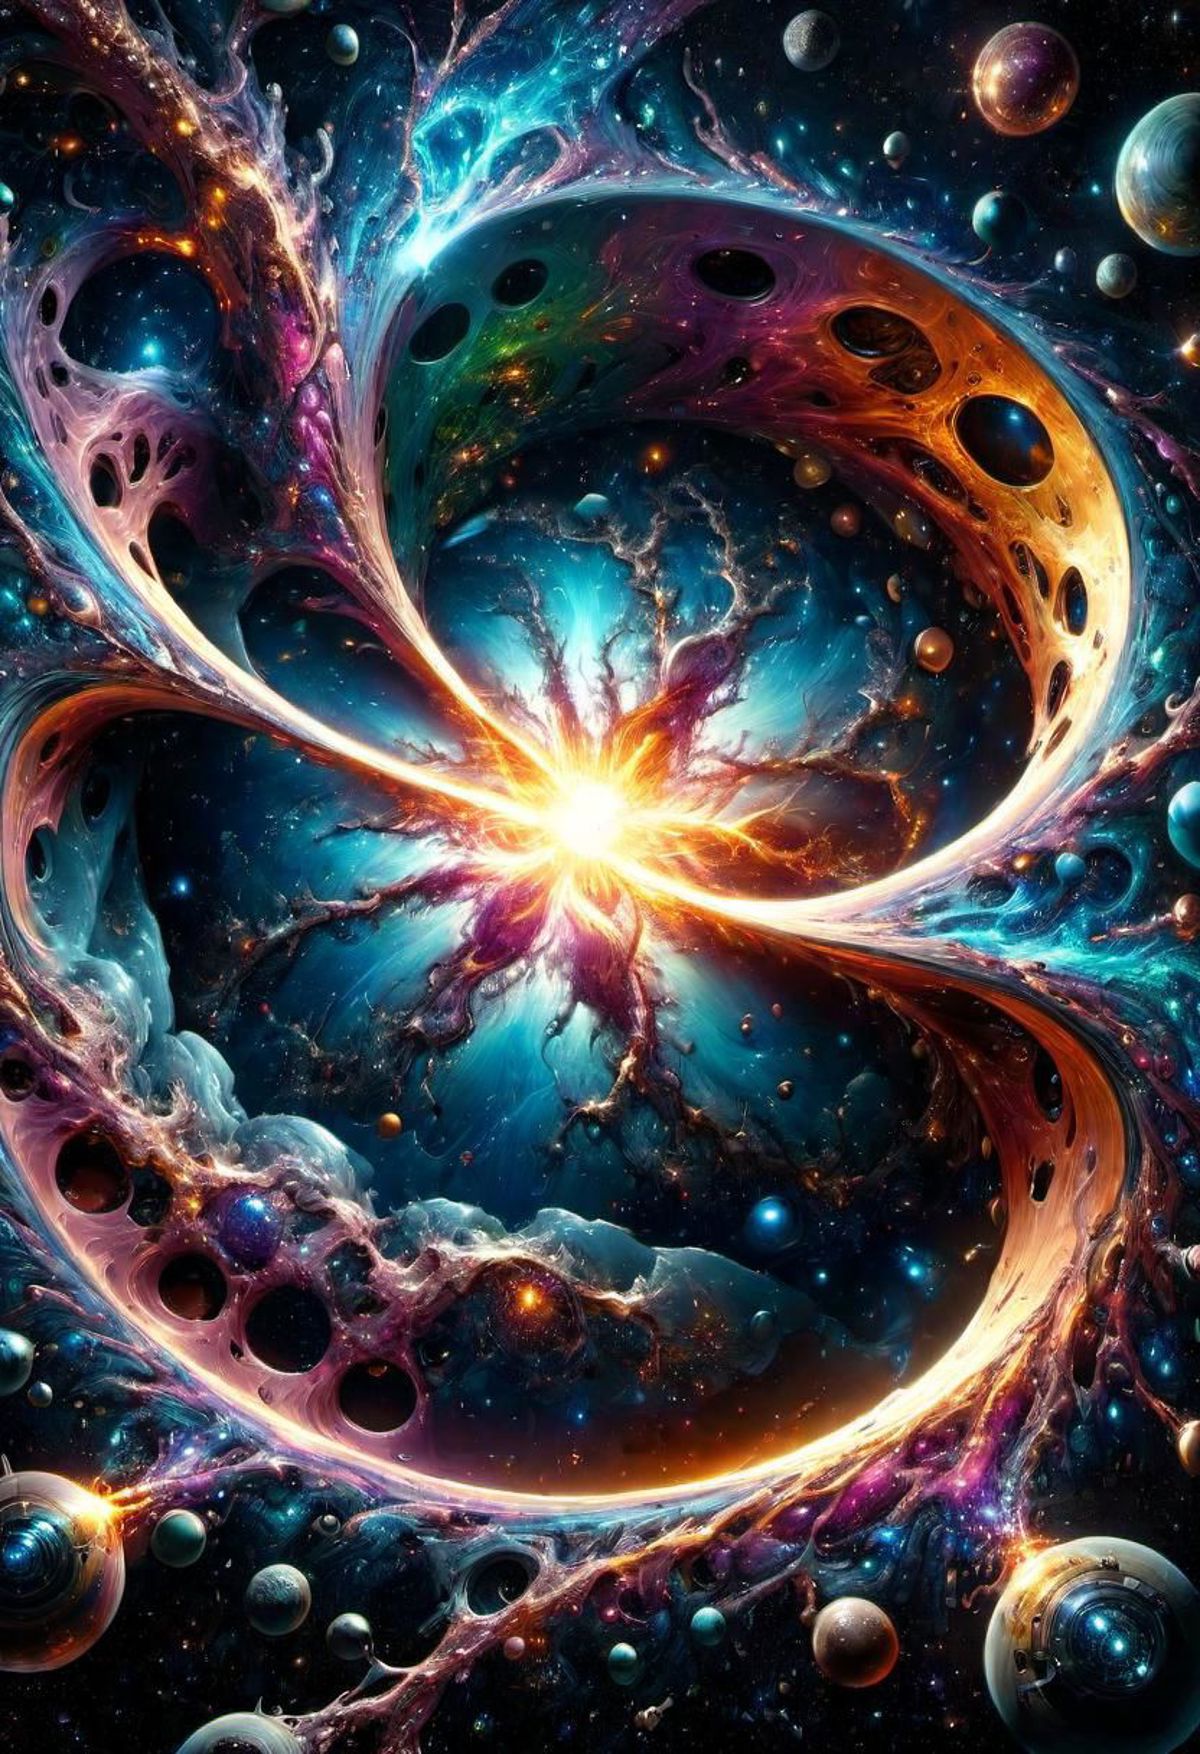 A vibrant and colorful artwork of a nebula, with a bright blue center and yellow and orange hues. The artwork showcases a spiral-shaped design and features a variety of stars and celestial elements.